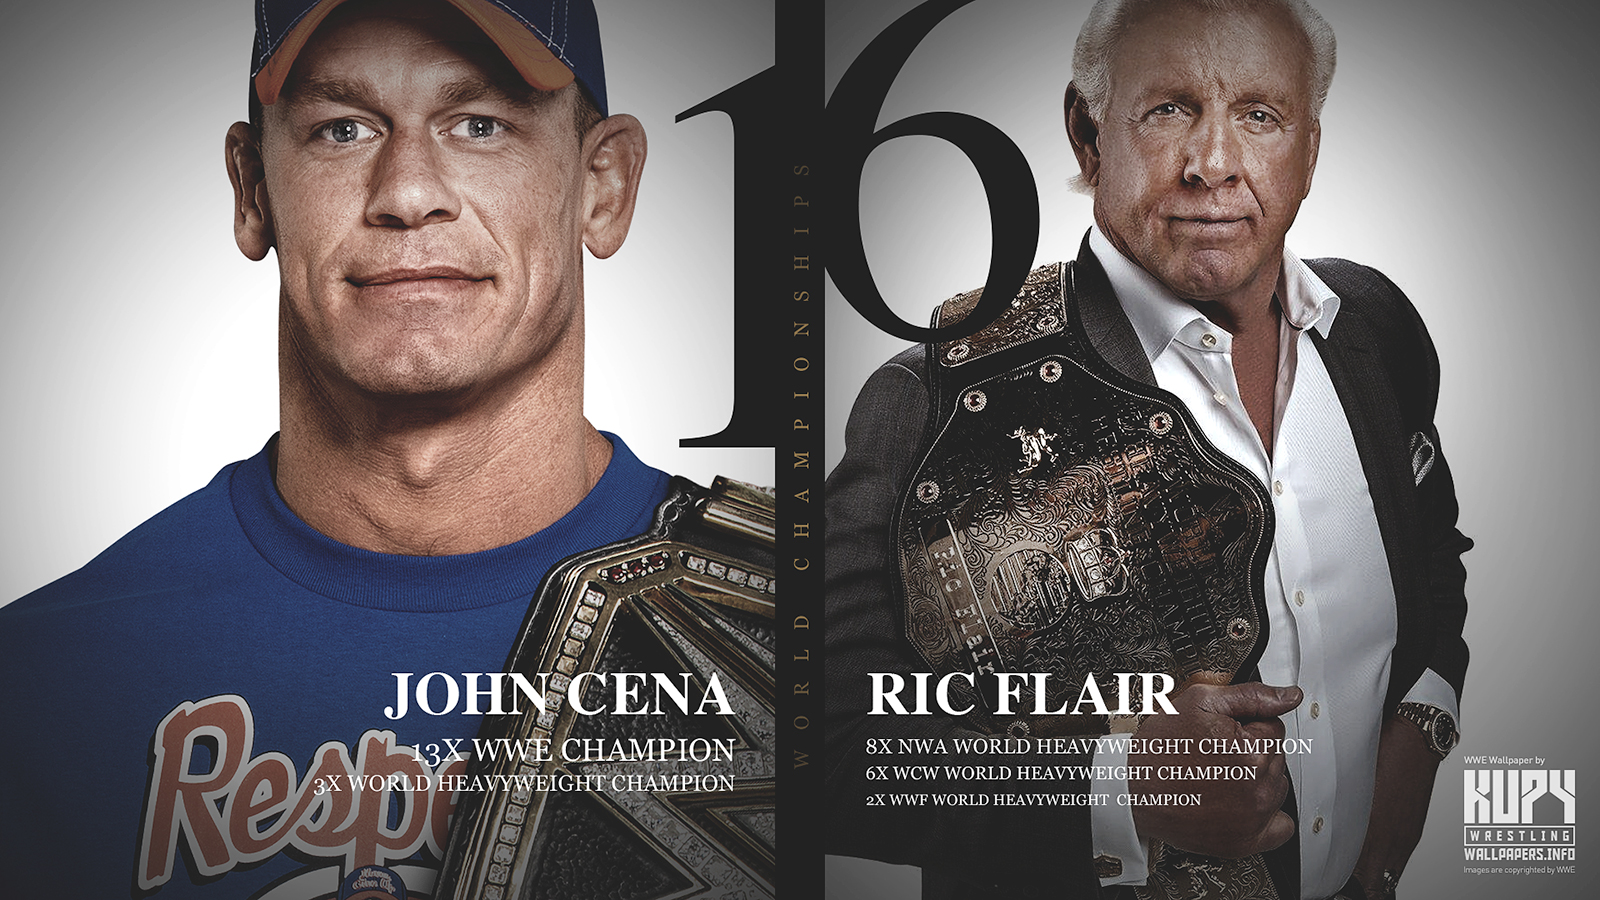 NEW 16-time World Champions: Ric Flair and John Cena wallpaper! - Kupy  Wrestling Wallpapers